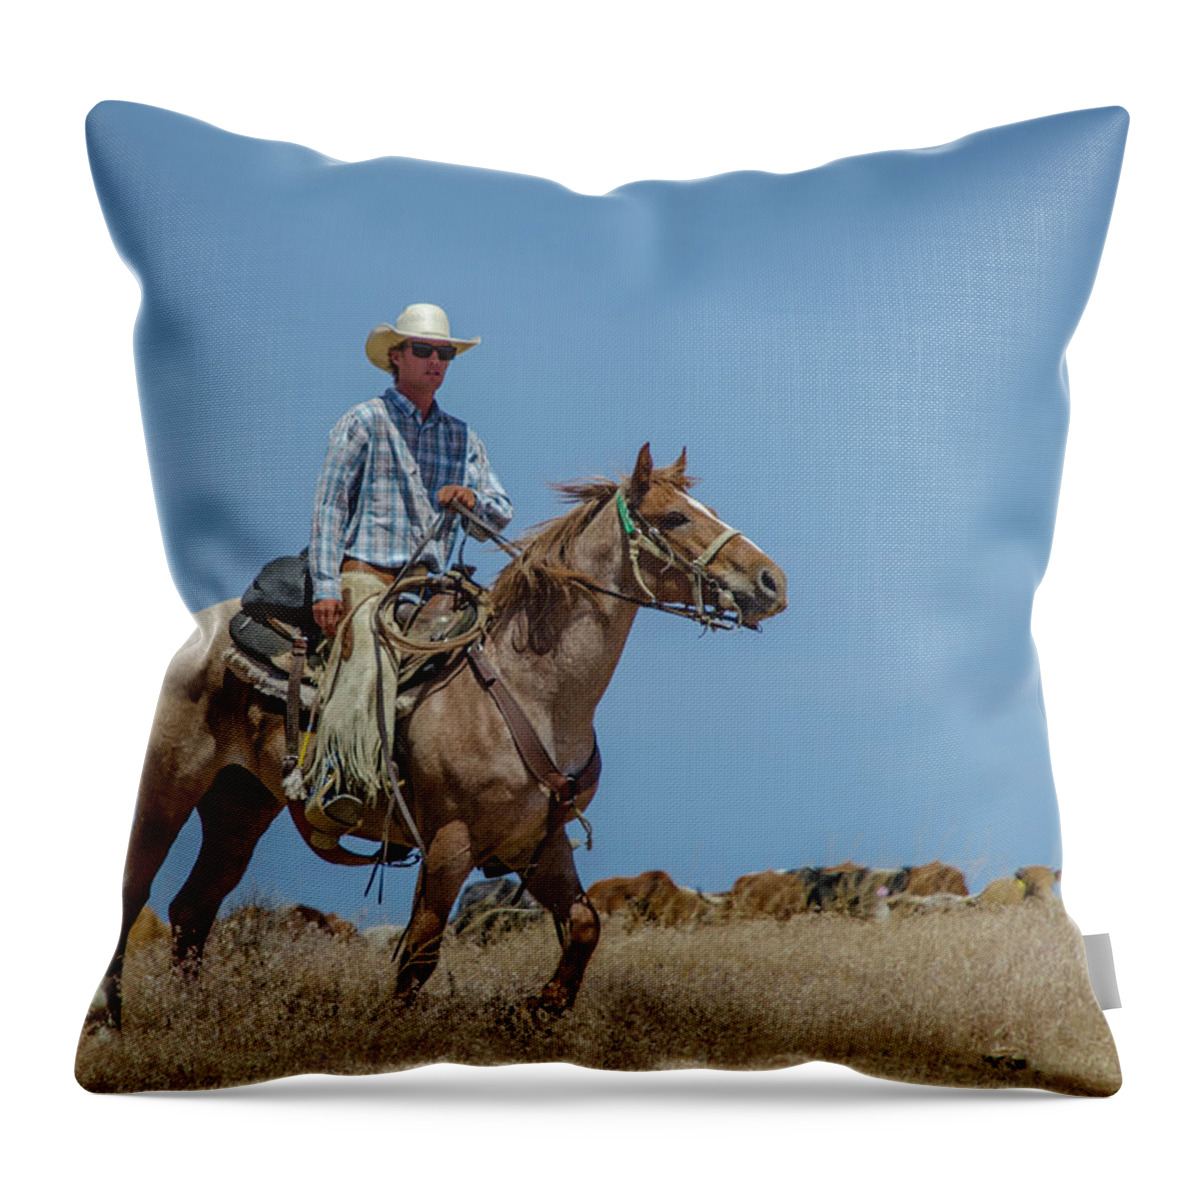 Reno Throw Pillow featuring the photograph Reno Cattle Drive 7 by Rick Mosher